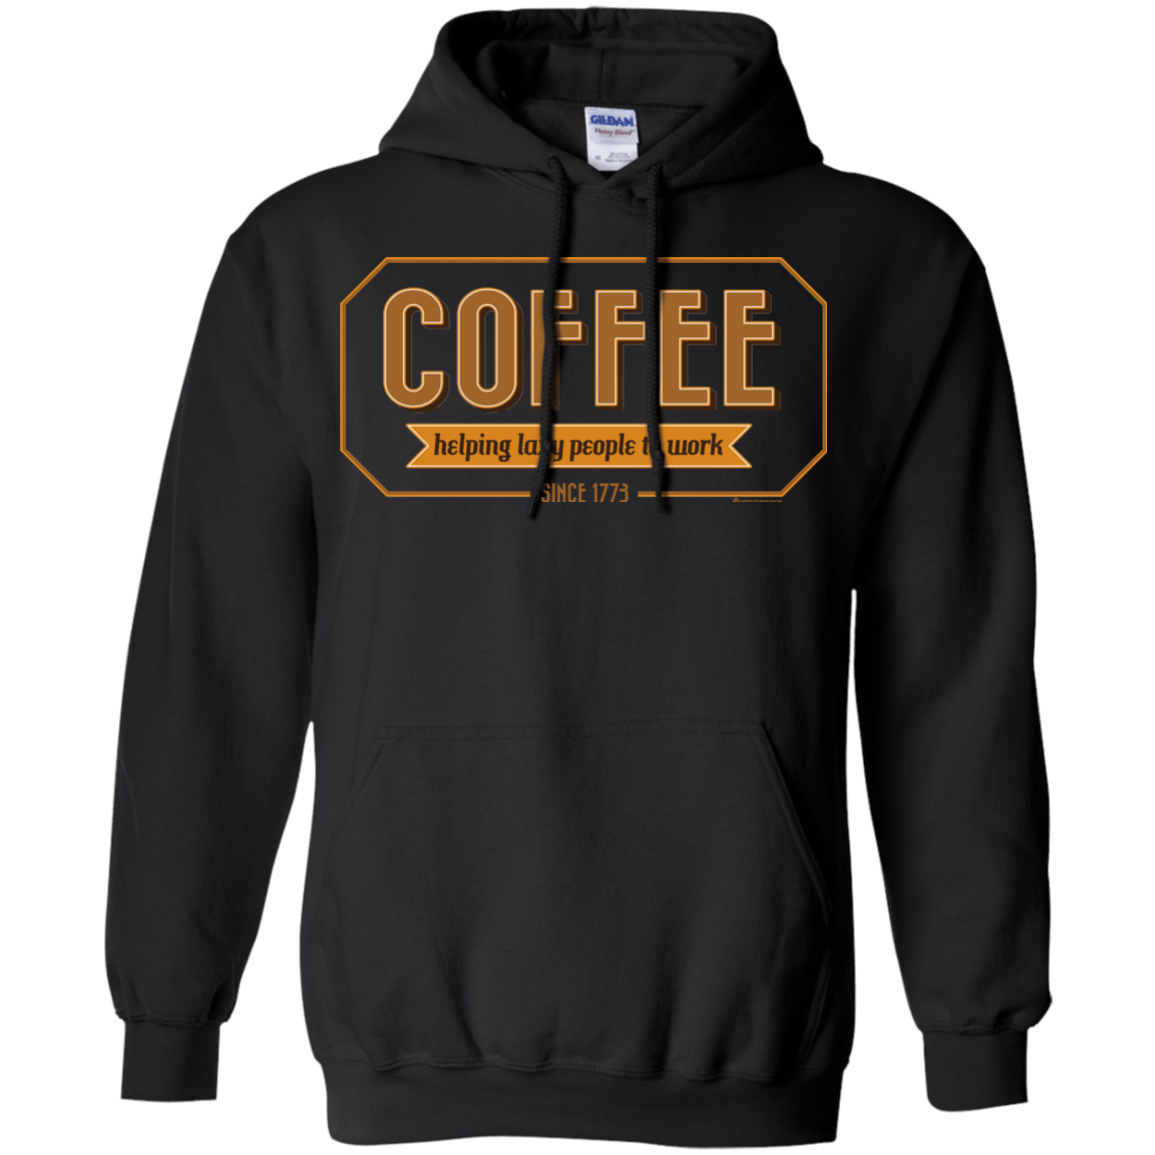 Sweatshirts Black / Small Coffee For Lazy People Pullover Hoodie